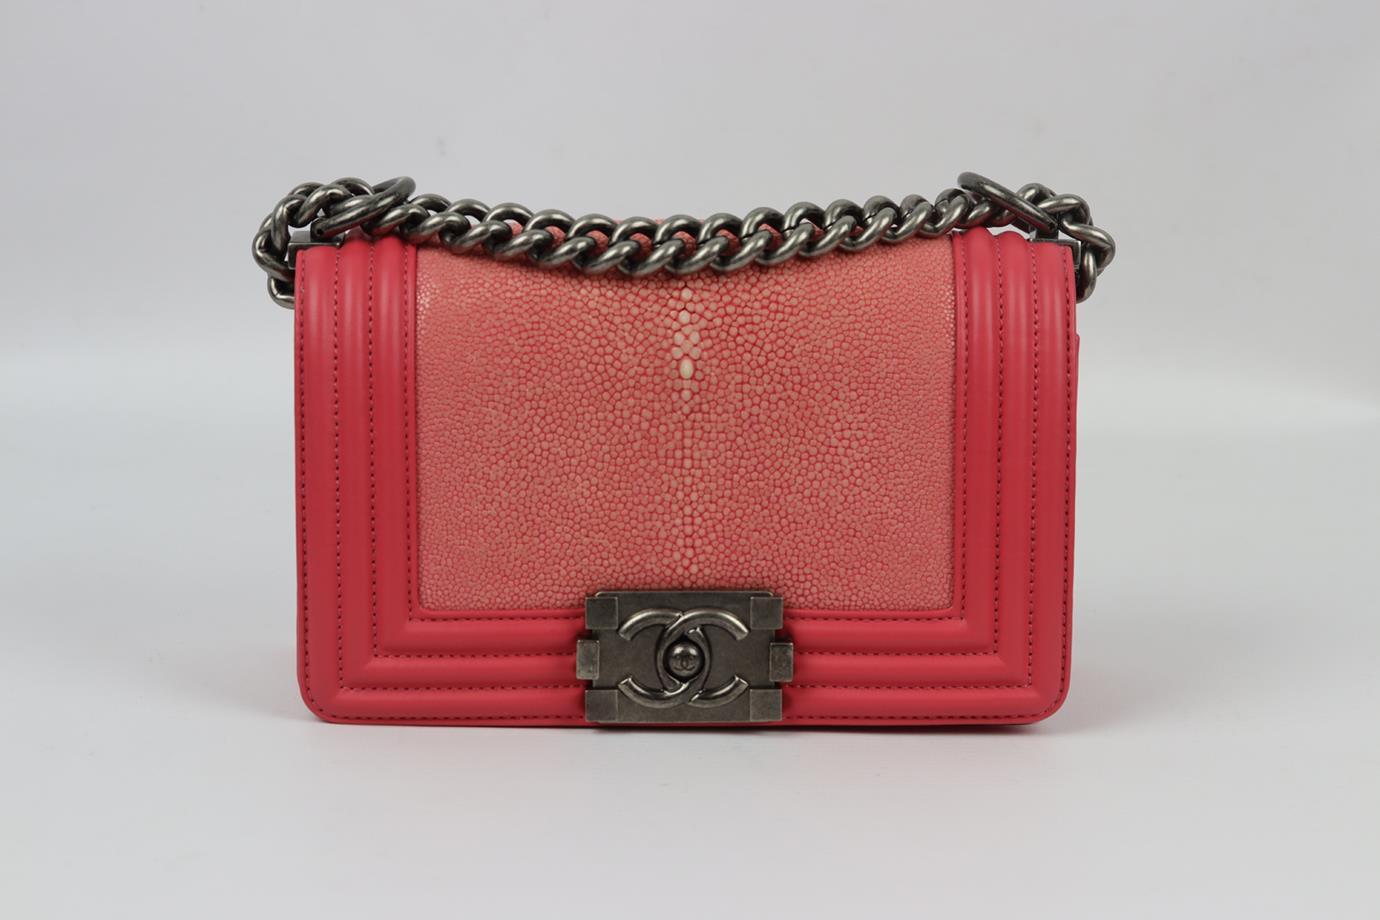 <ul>
<li>Chanel 2016 Boy small shagreen and leather shoulder bag.</li>
<li>Made from coral-pink shagreen and leather with matching leather interior and ruthenium chain shoulder straps.</li>
<li>Coral-pink.</li>
<li>Push lock fastening at